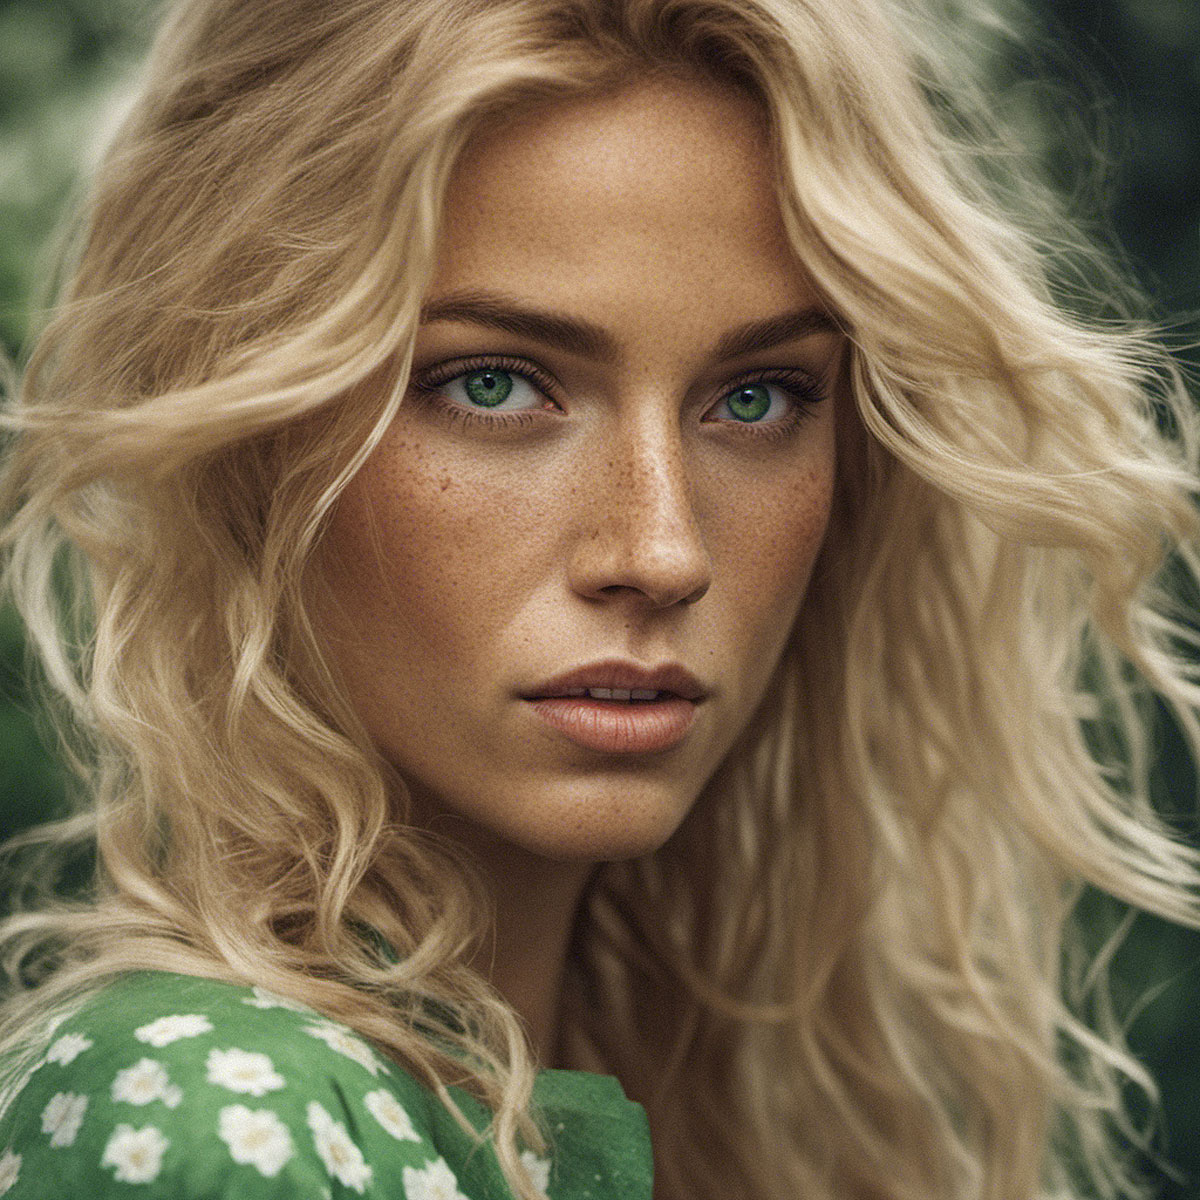 Blonde hair with freckles